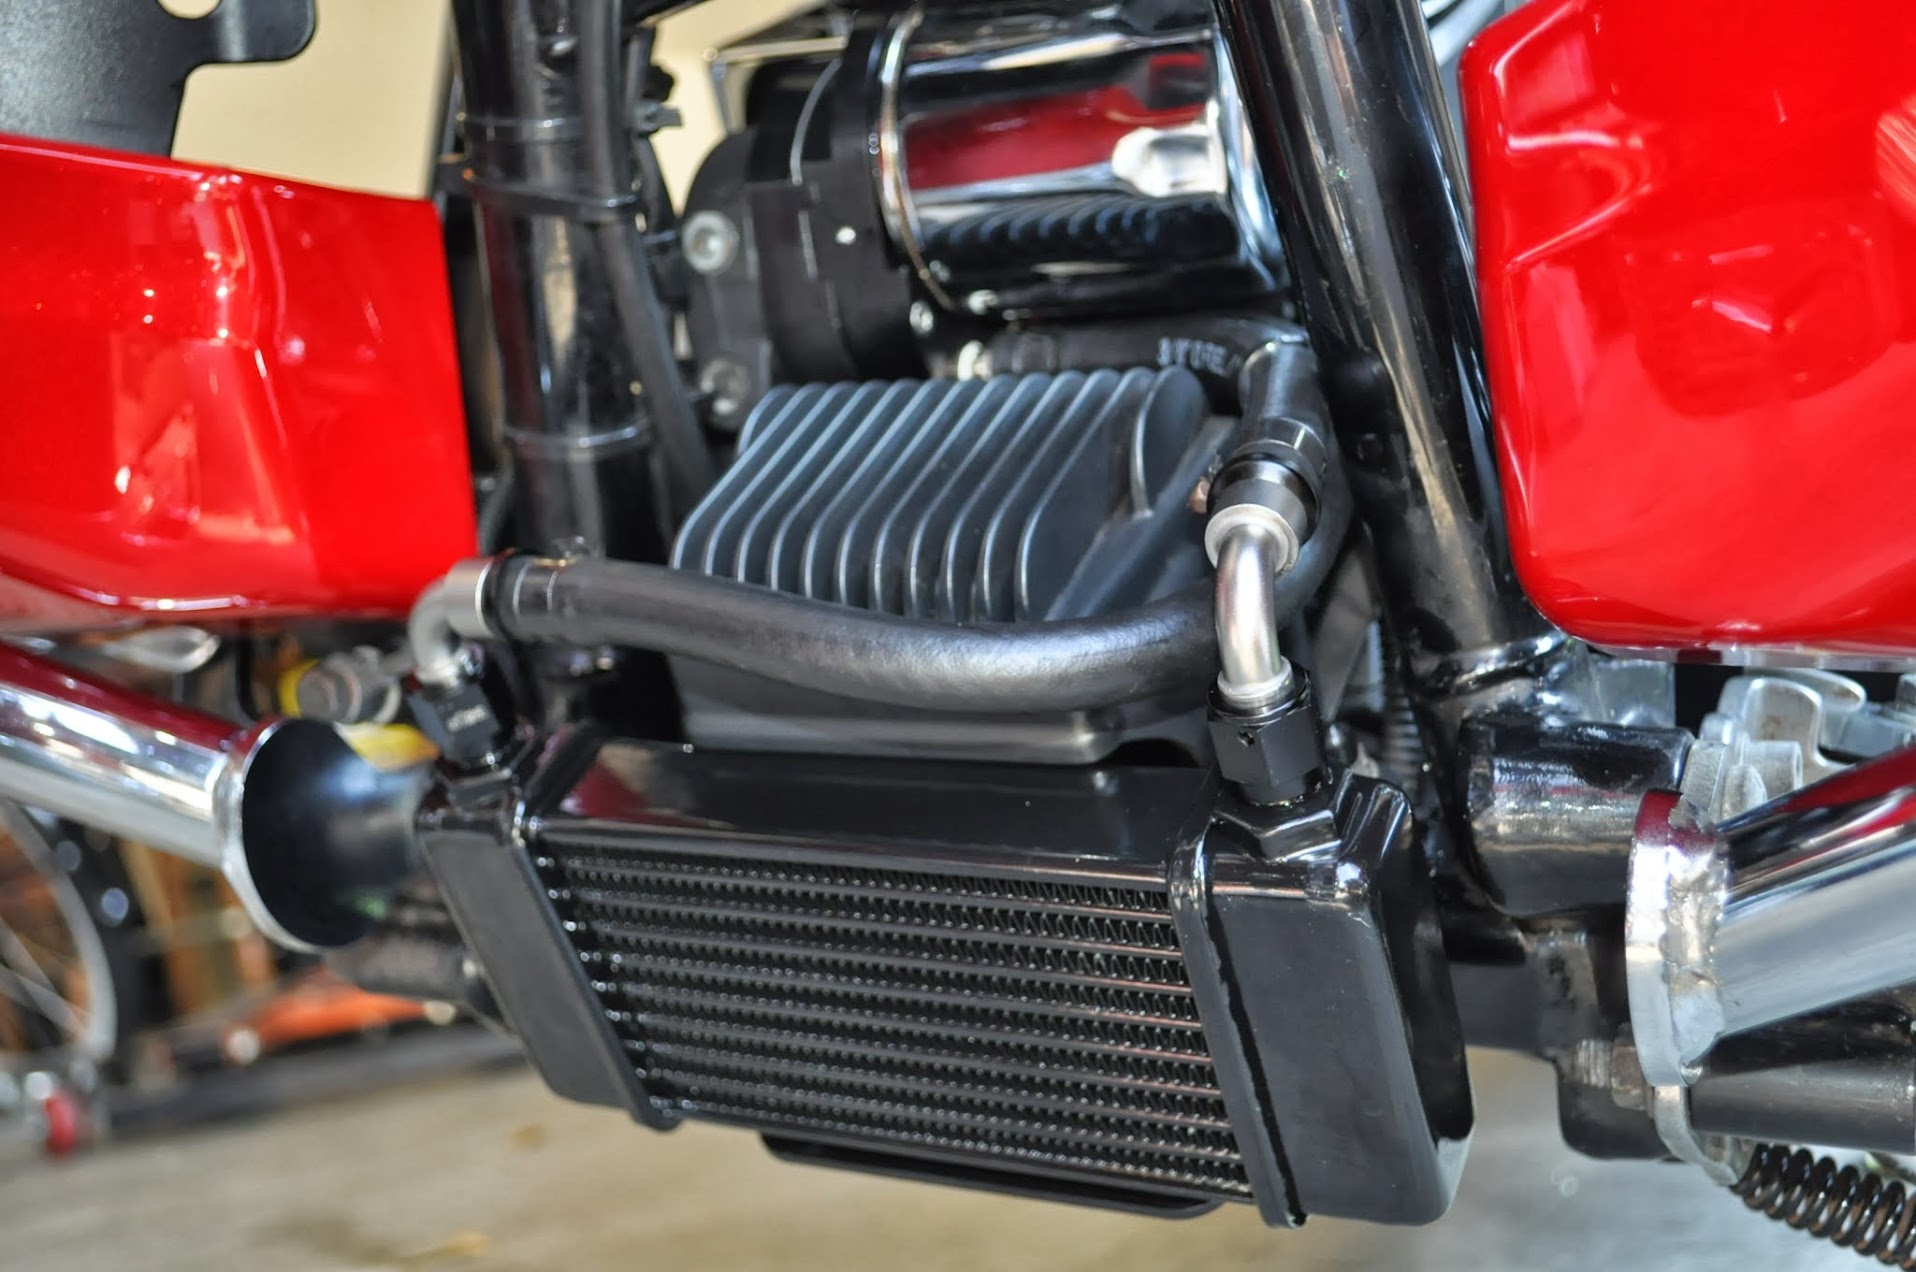 Jagg 10 Row Oil Cooler Install On Ultra Pics Page 6 Harley Davidson Forums